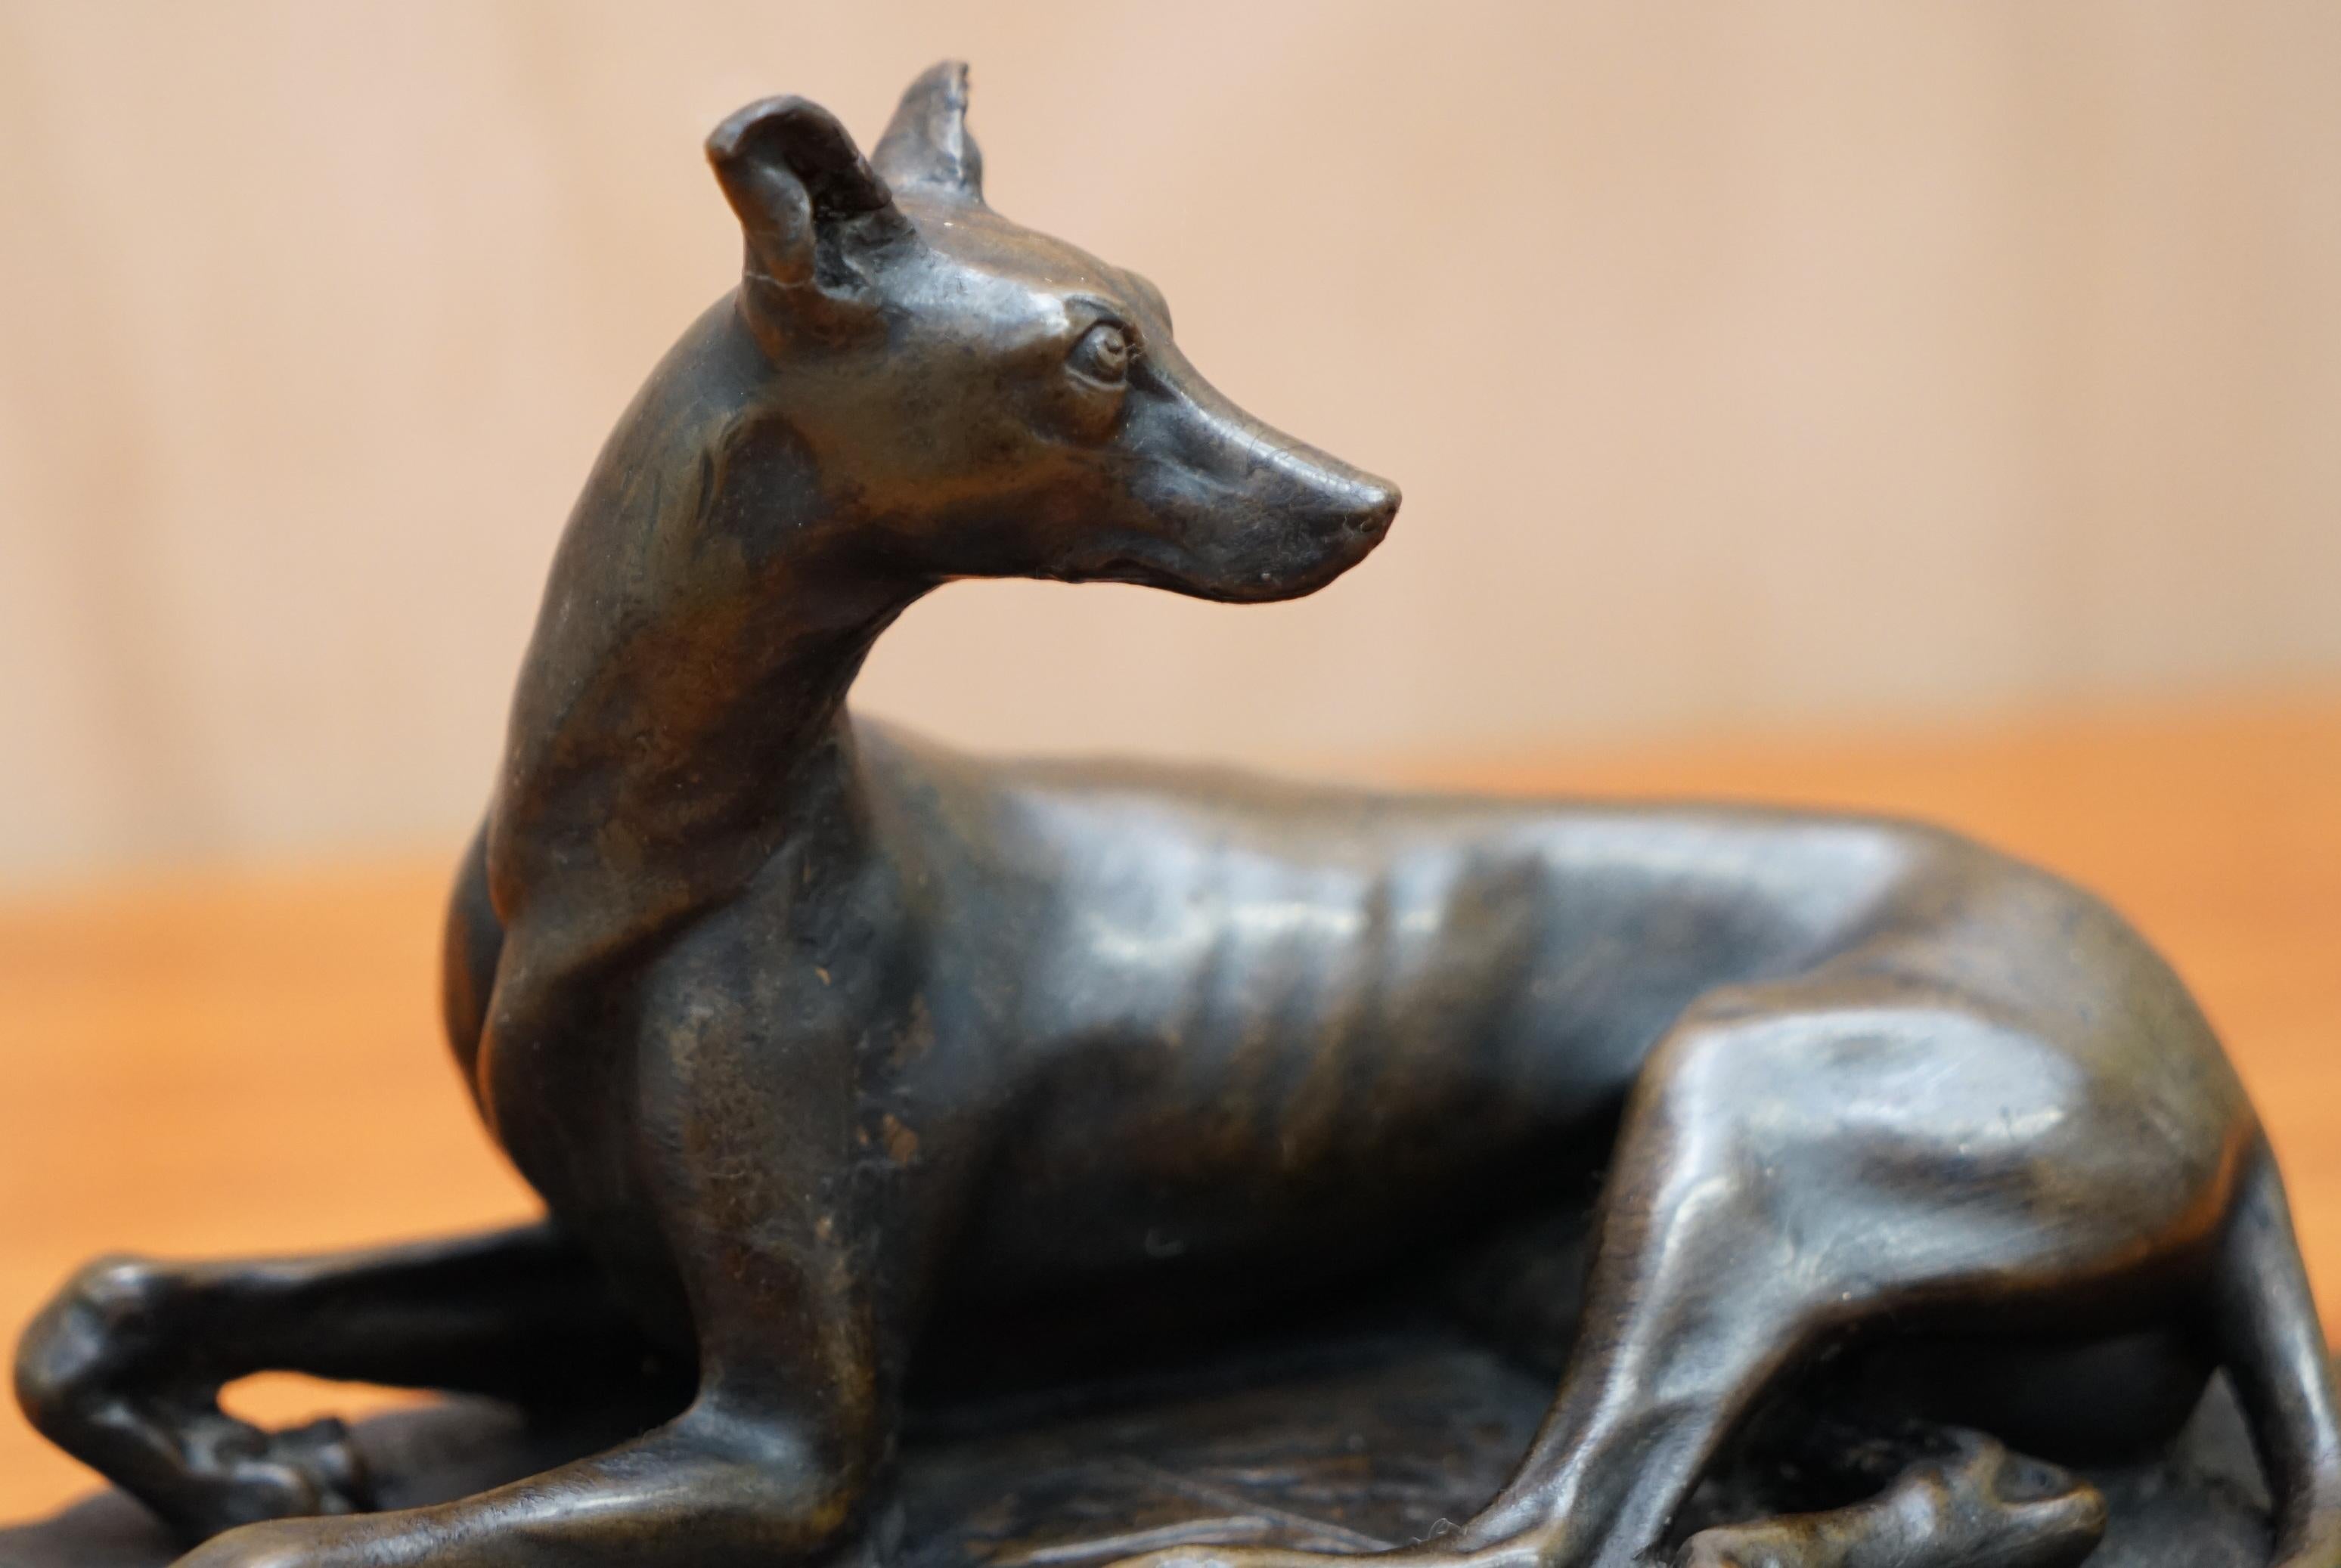 Hand-Crafted Lovely Bronze Statue of a Whippet Dog Laying Down with a Expecting Expression